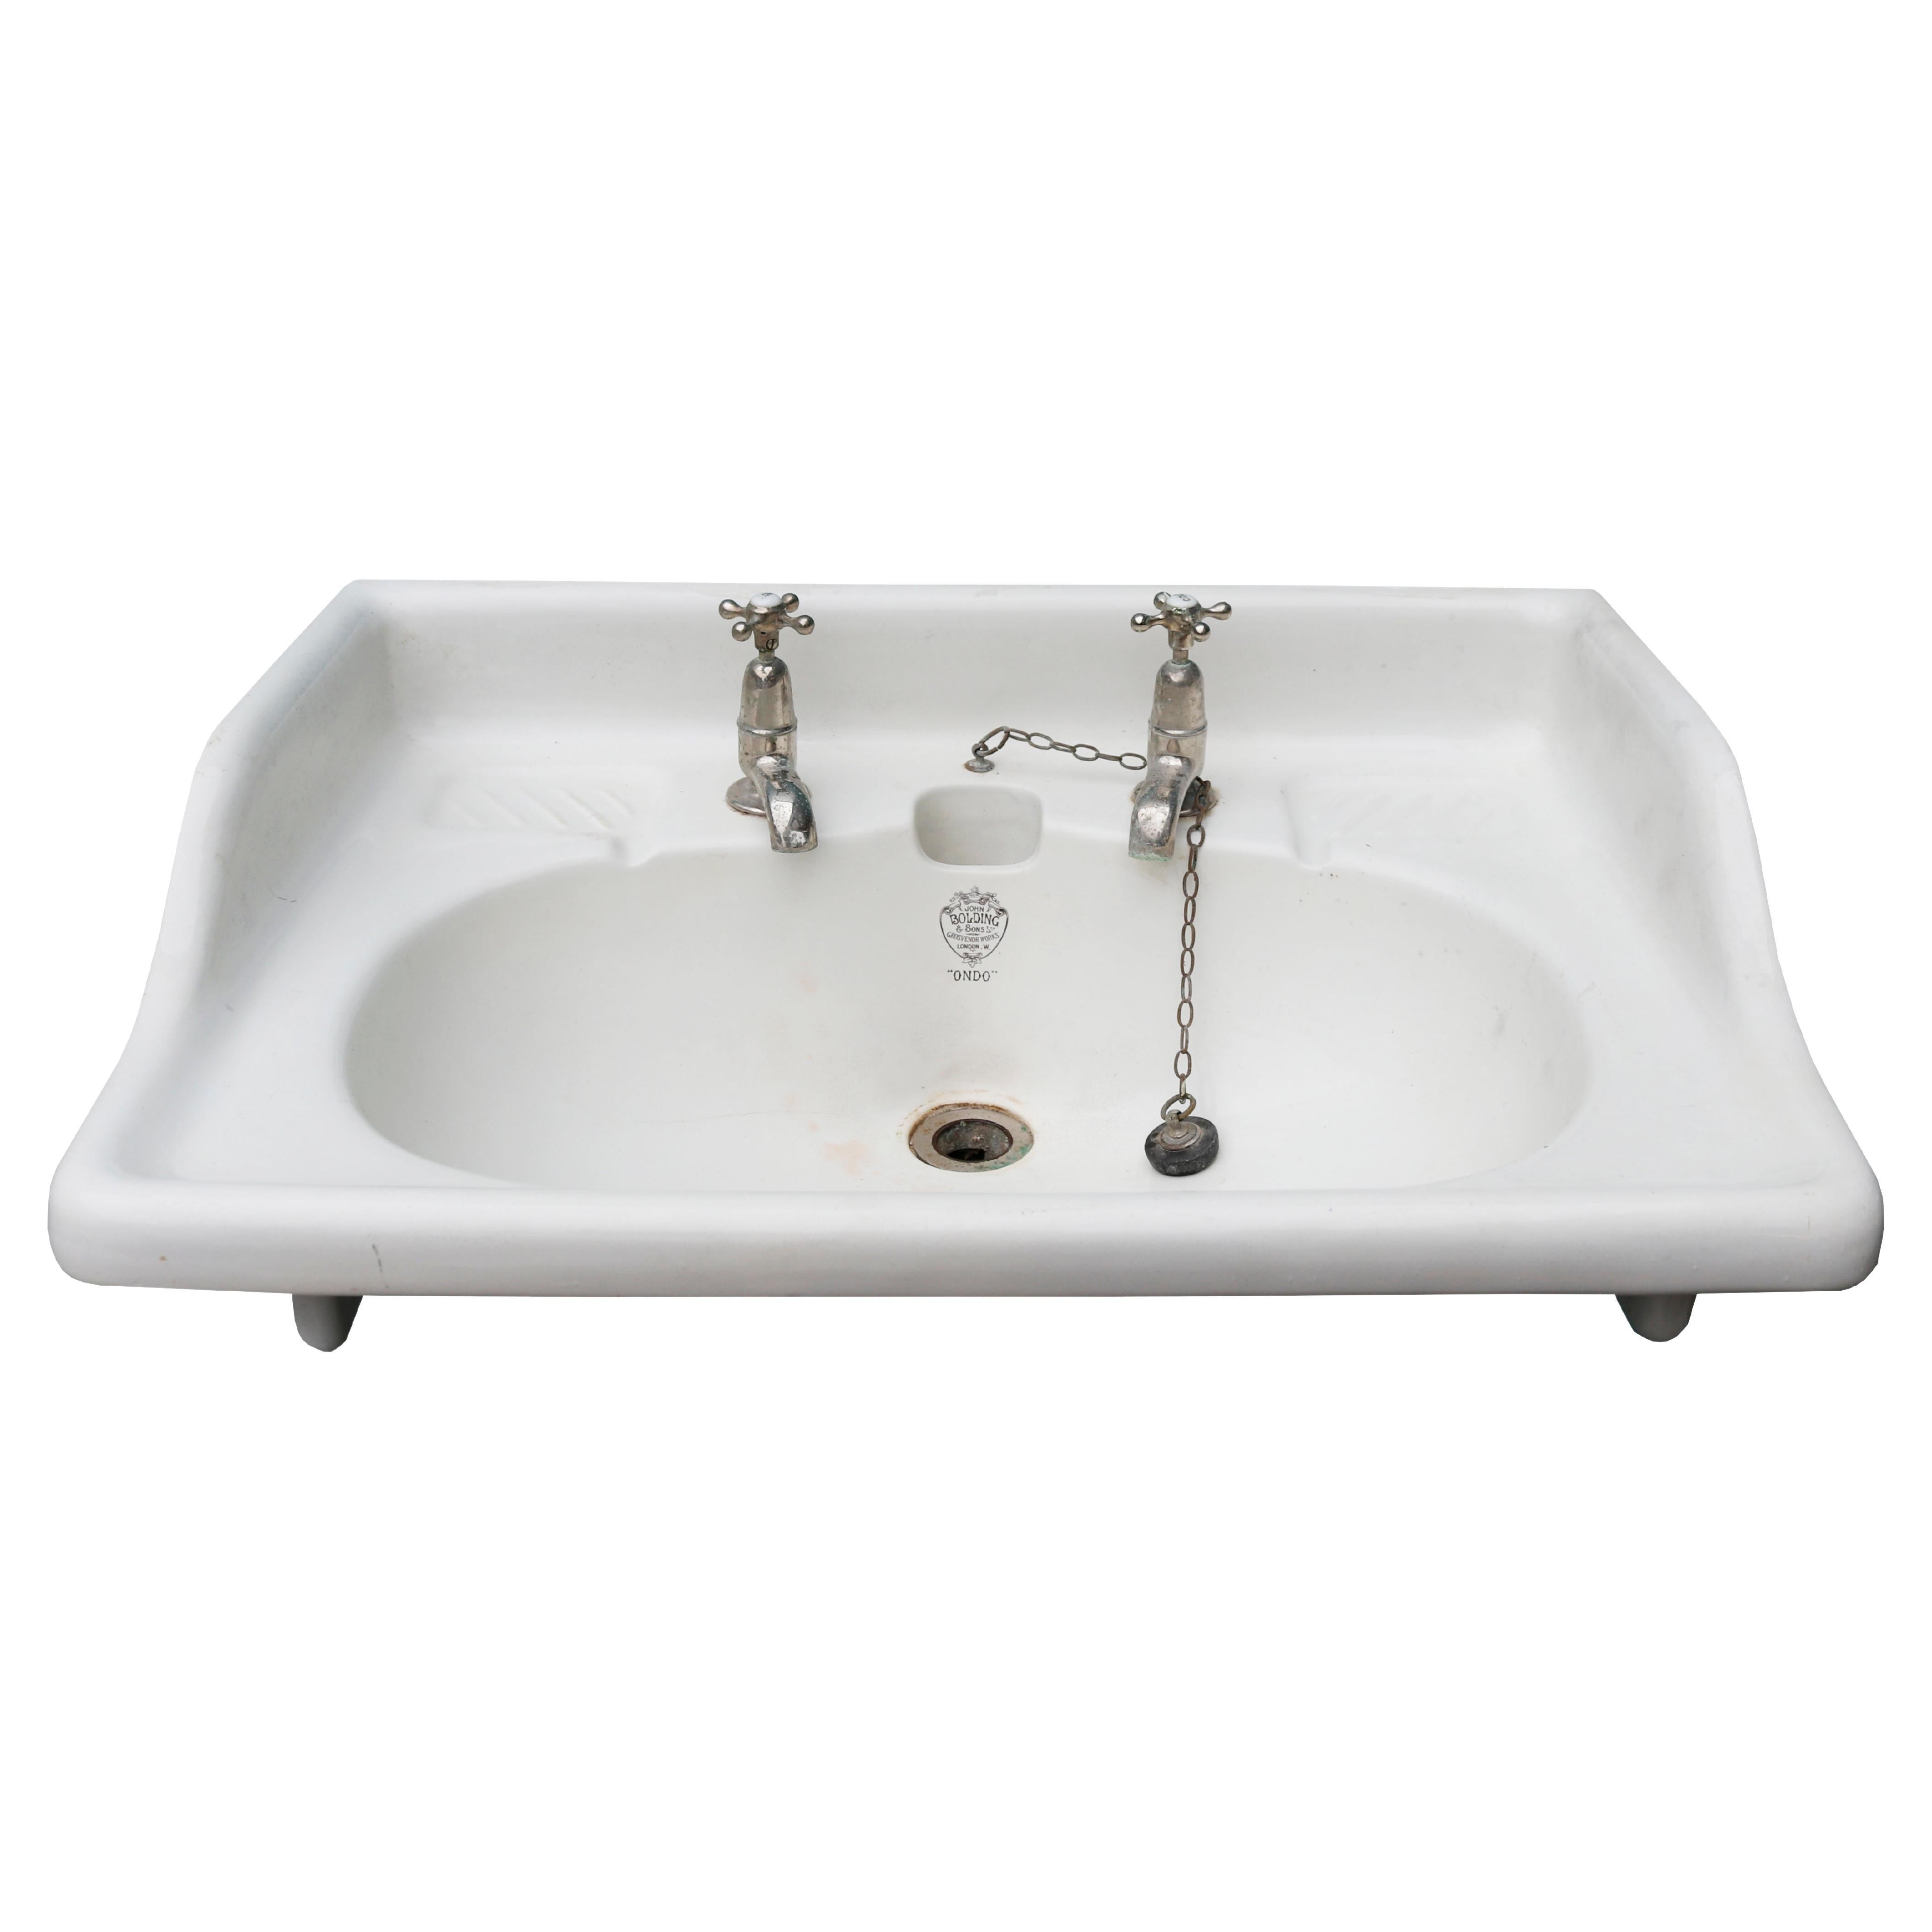 What is a wash basin used for?